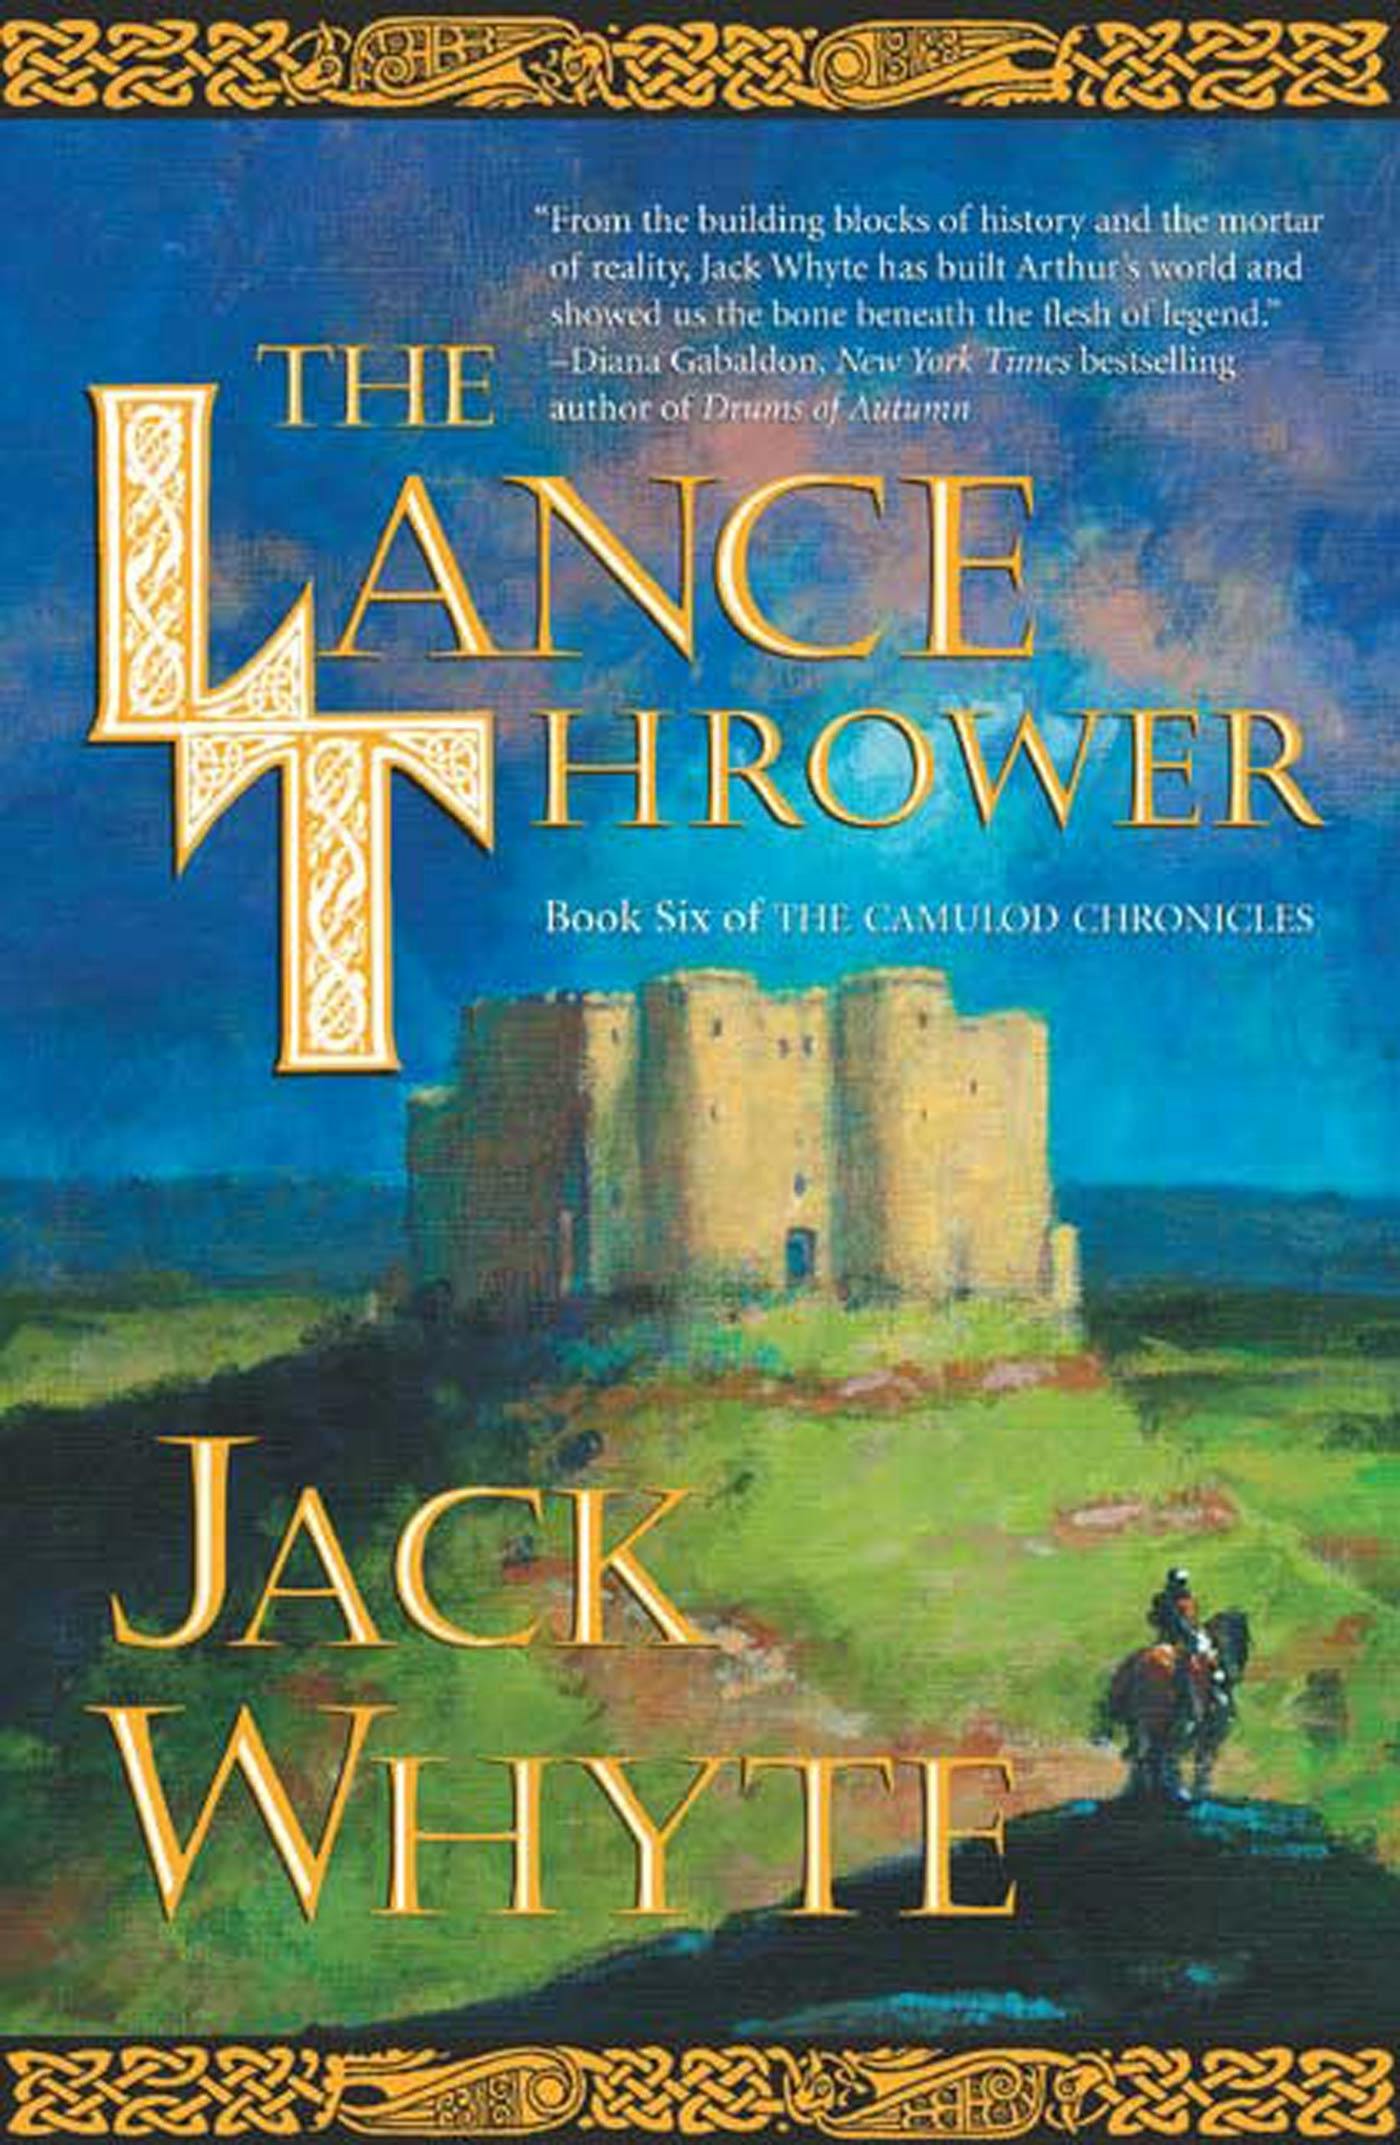 Cover for the book titled as: The Lance Thrower